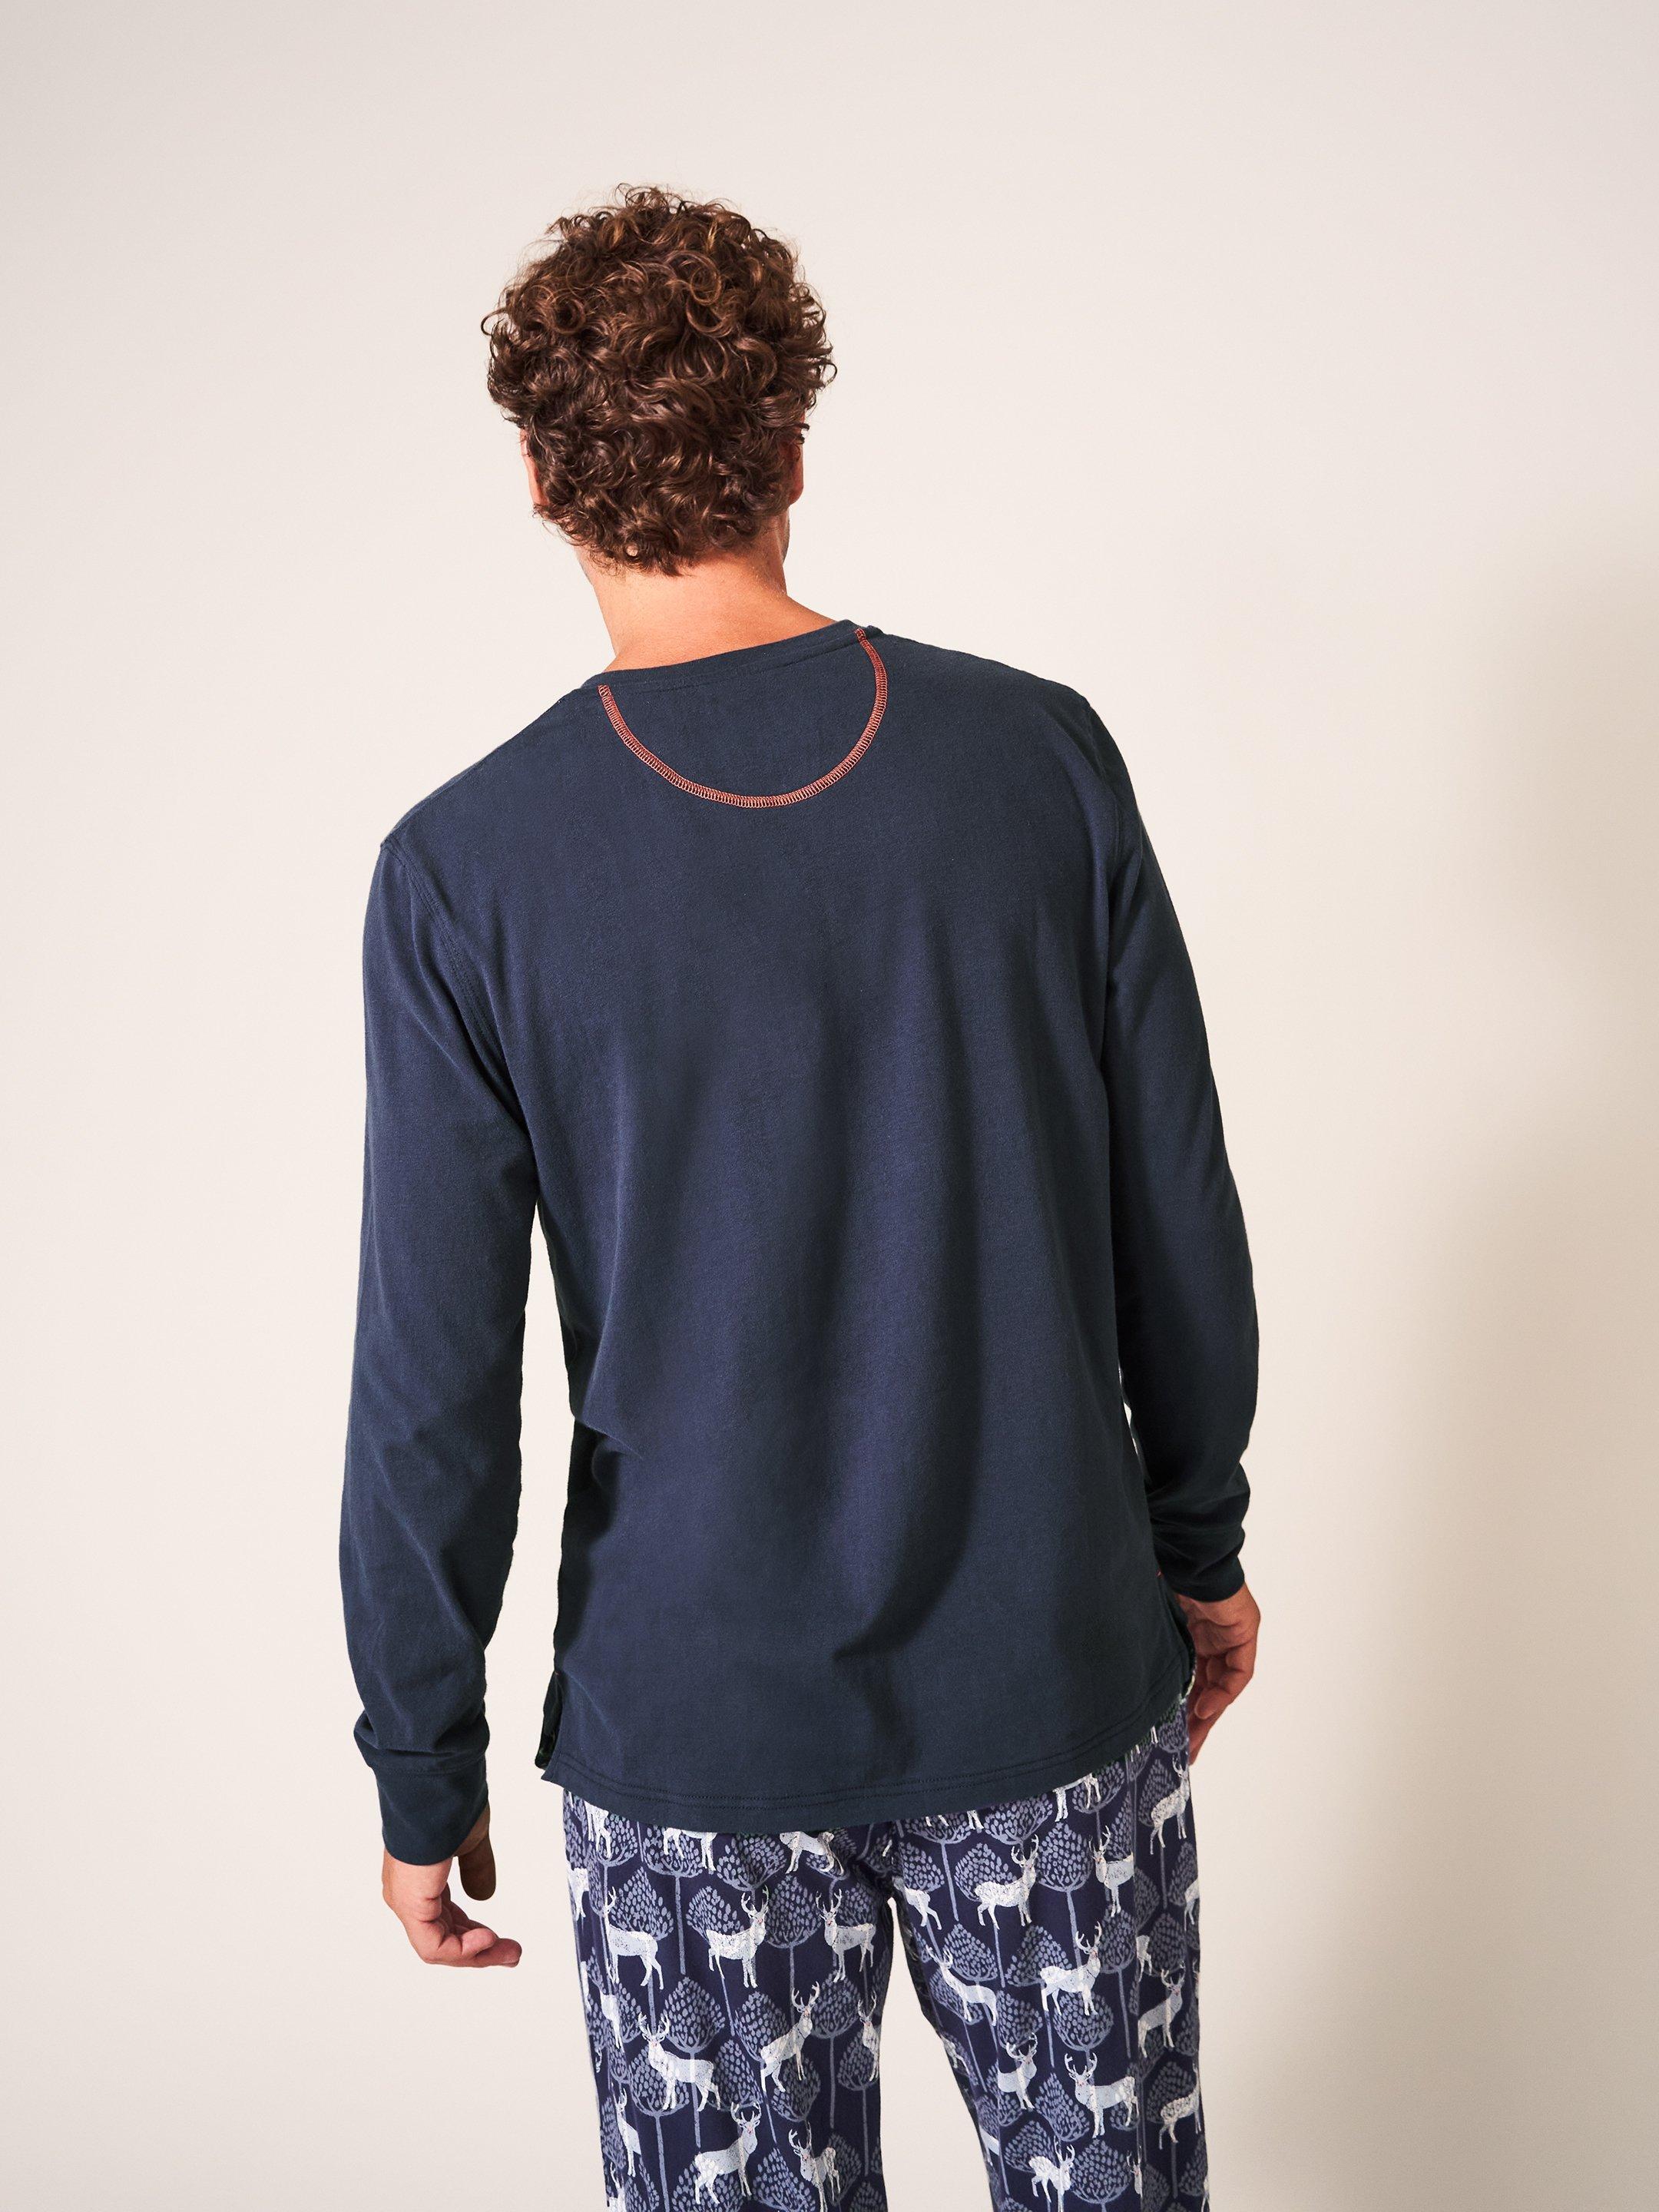 Stag Family Time Jersey PJ Top in NAVY MULTI - MODEL FRONT